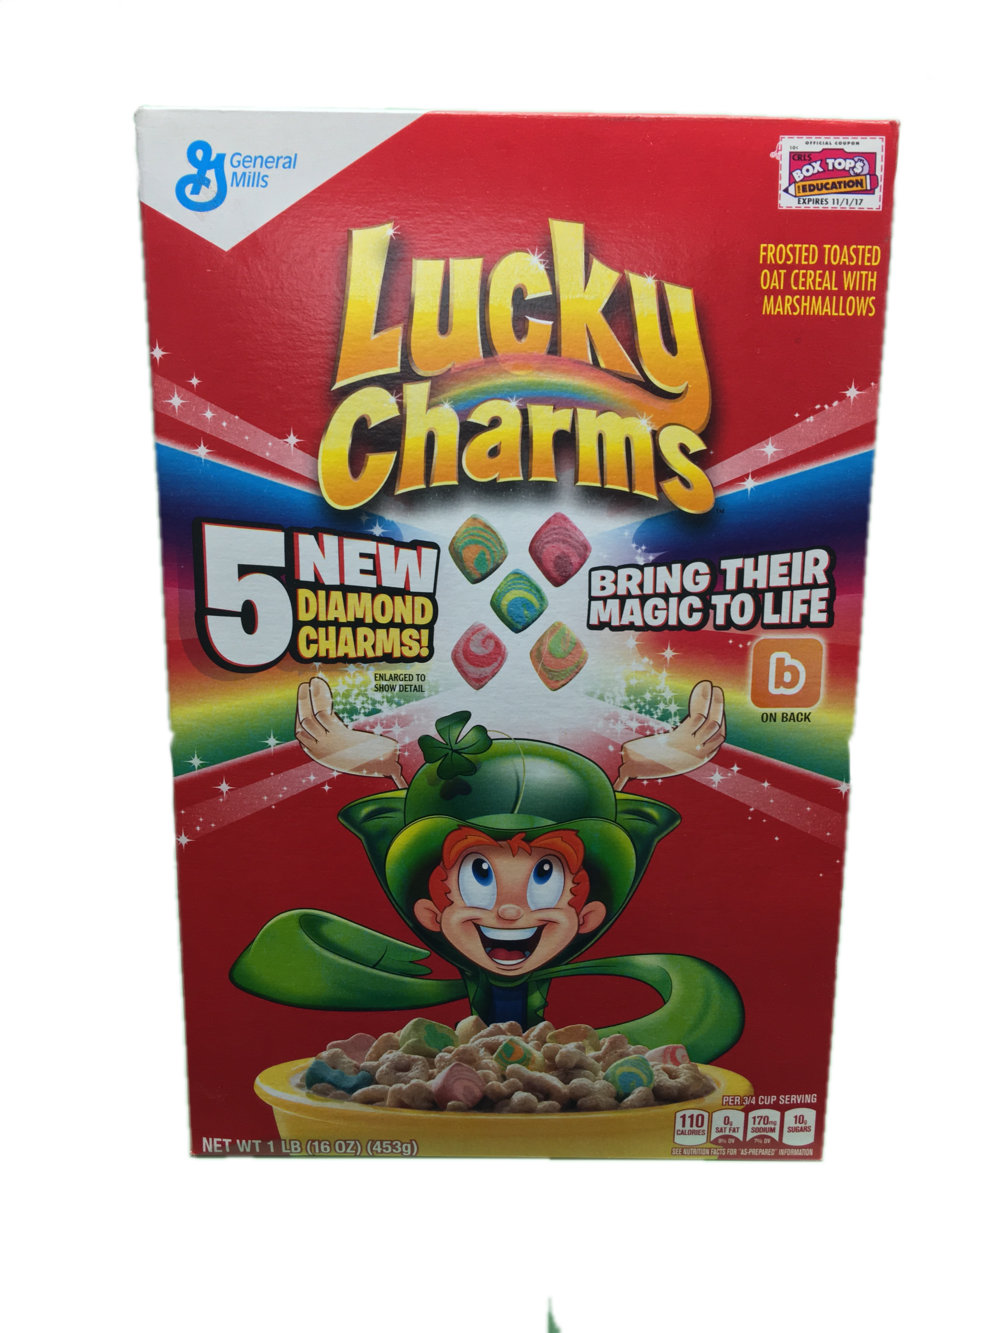 download-copy-of-general-mills-lucky-charms-16-oz-png-image-with-no